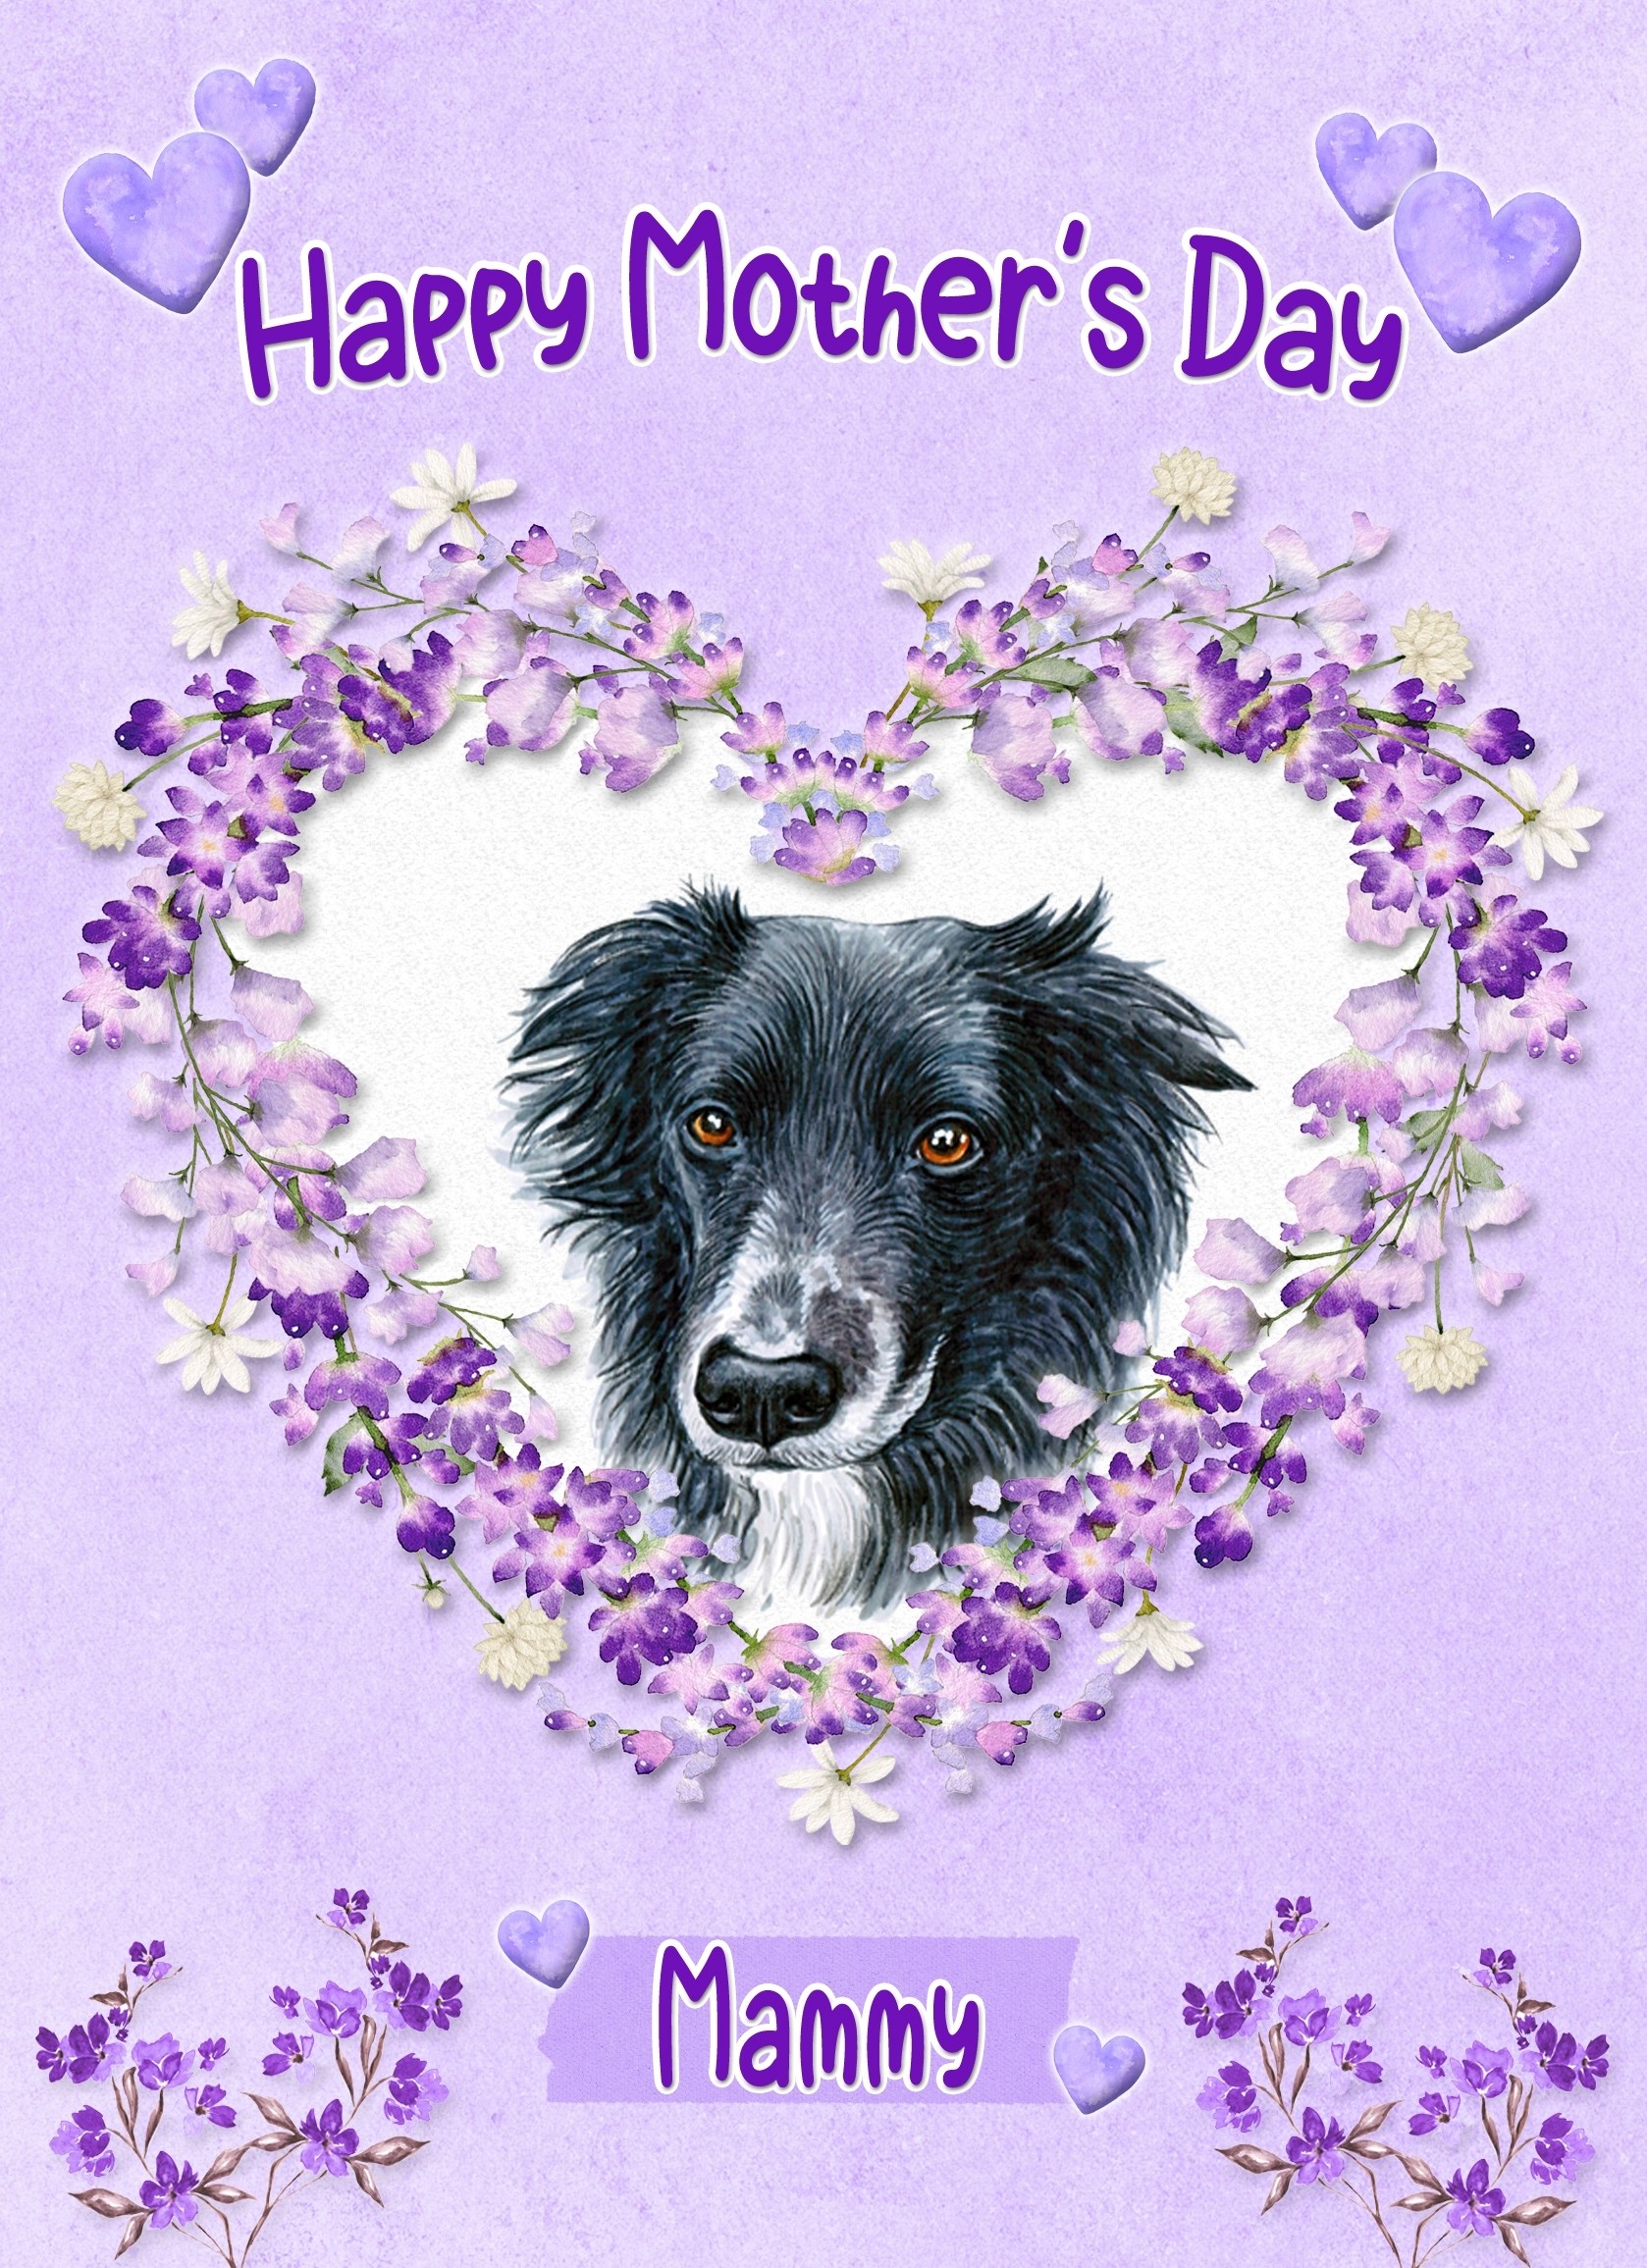 Border Collie Dog Mothers Day Card (Happy Mothers, Mammy)